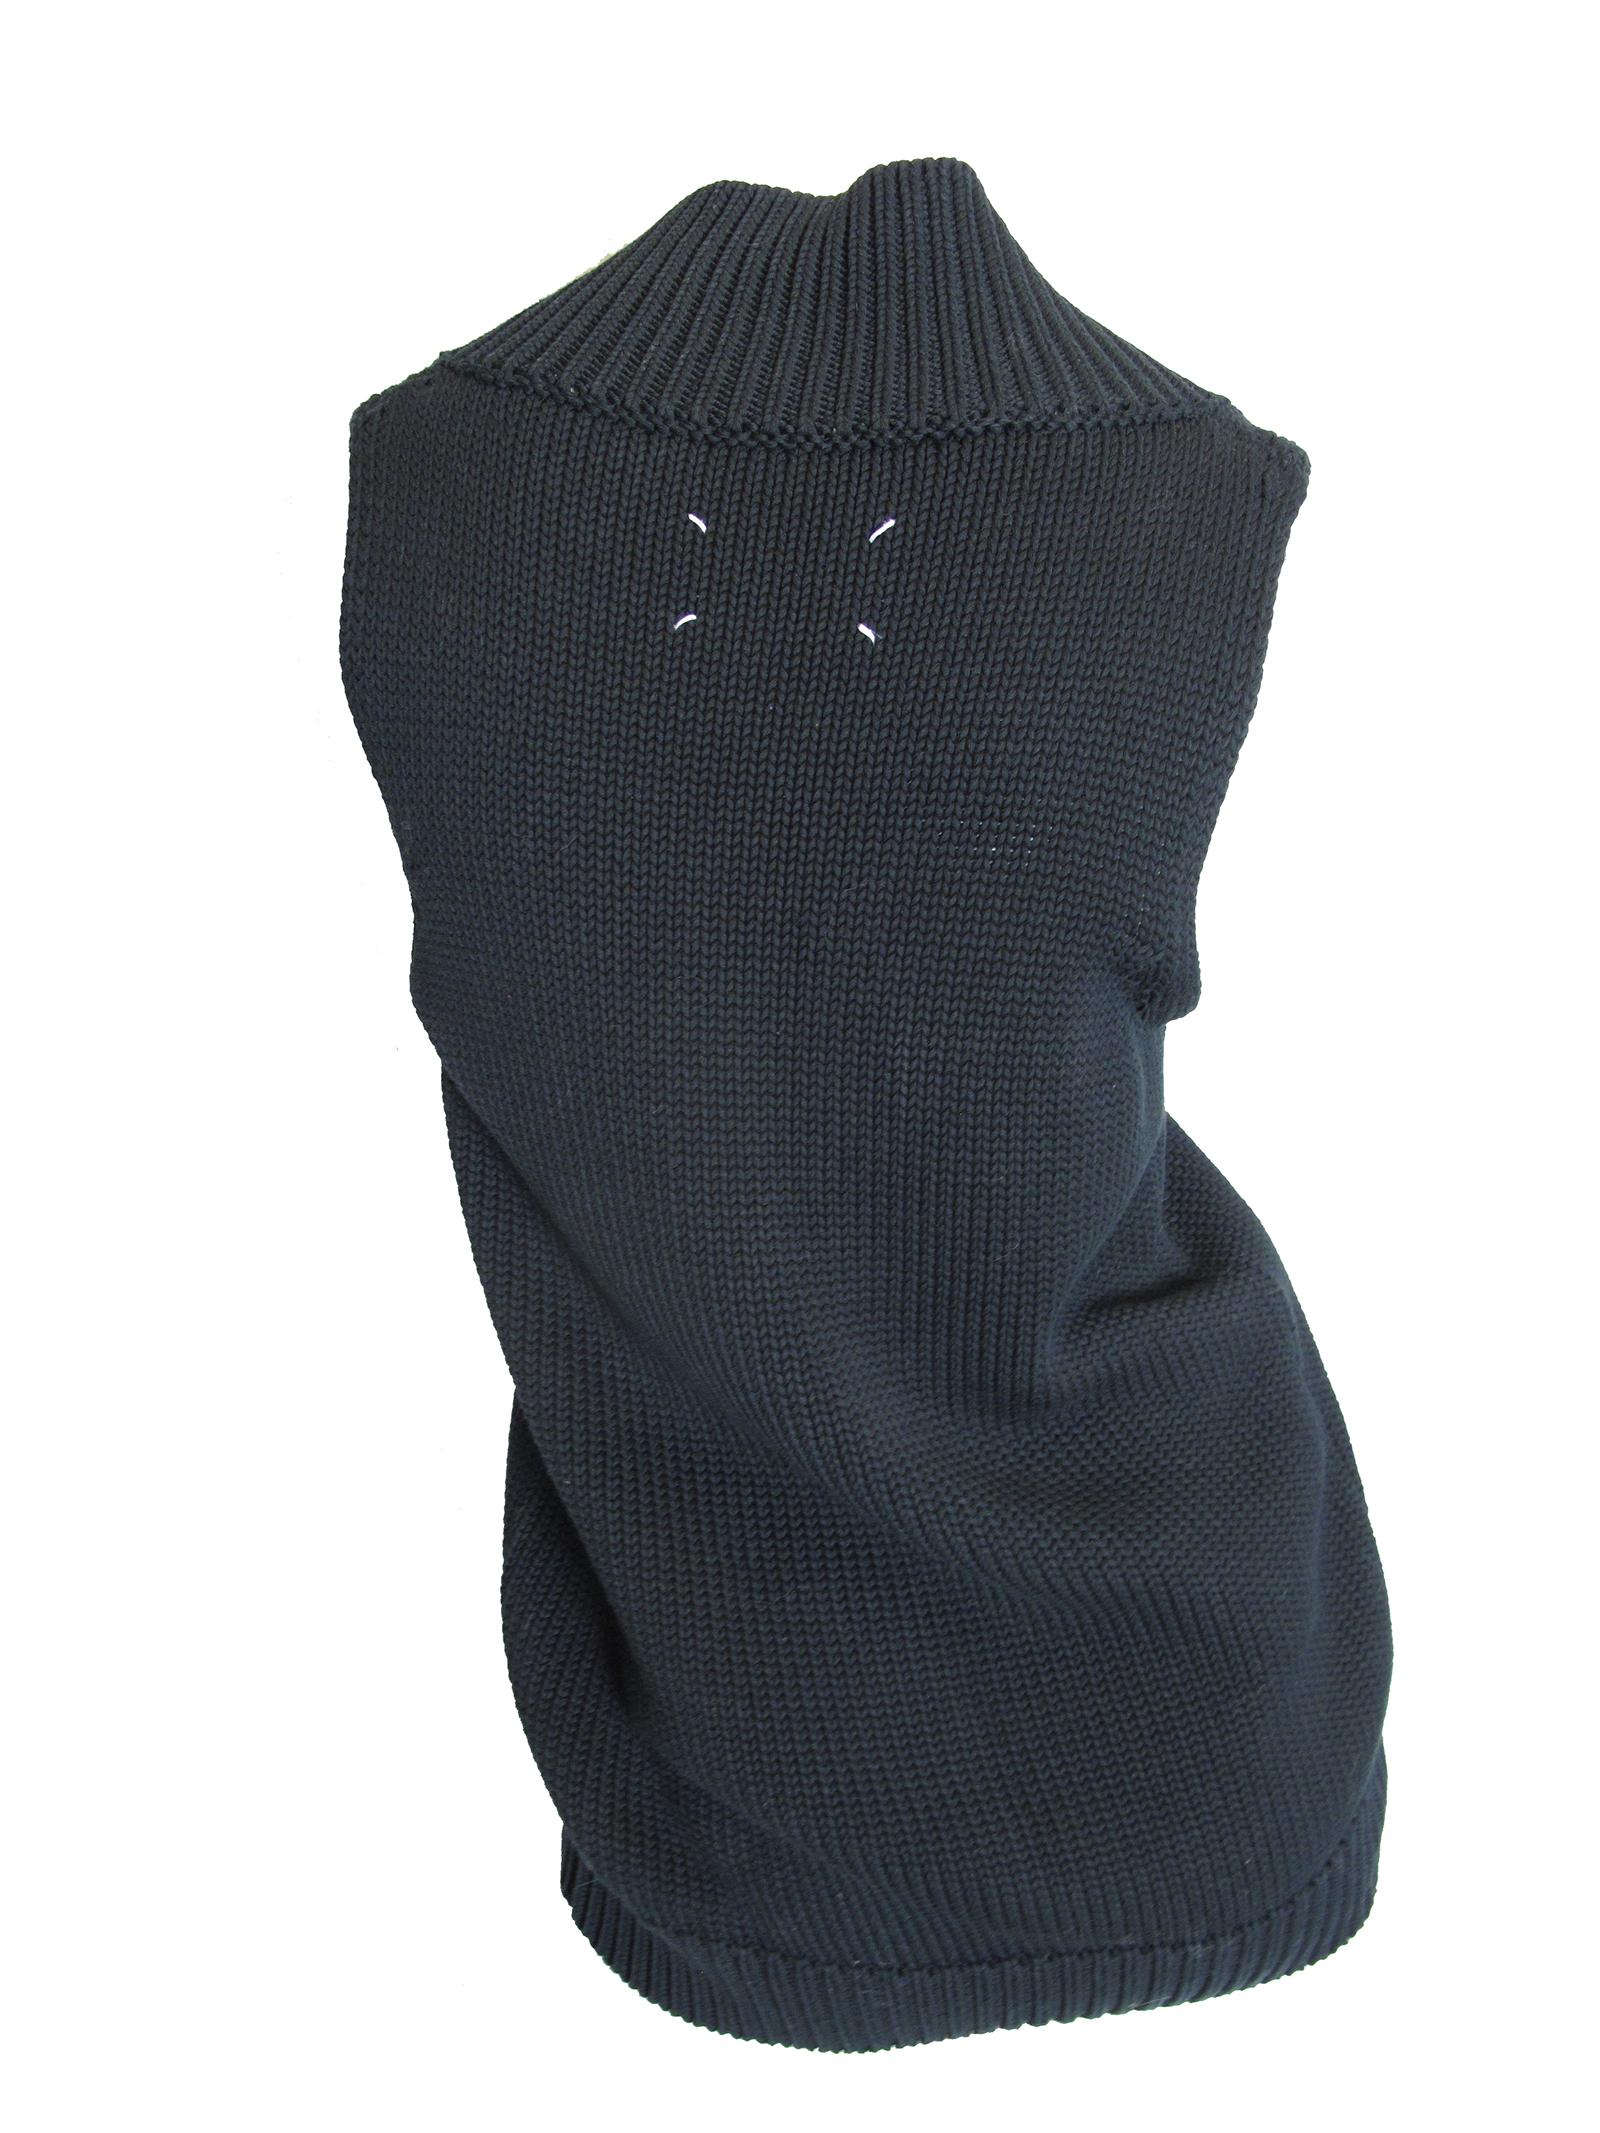 Martin Margiela black cotton sweater vest with zipper.  Condition: Excellent. Size M

We accept returns for refund.  We offer free ground shipping within the US.  Please let us know if you have any questions. 